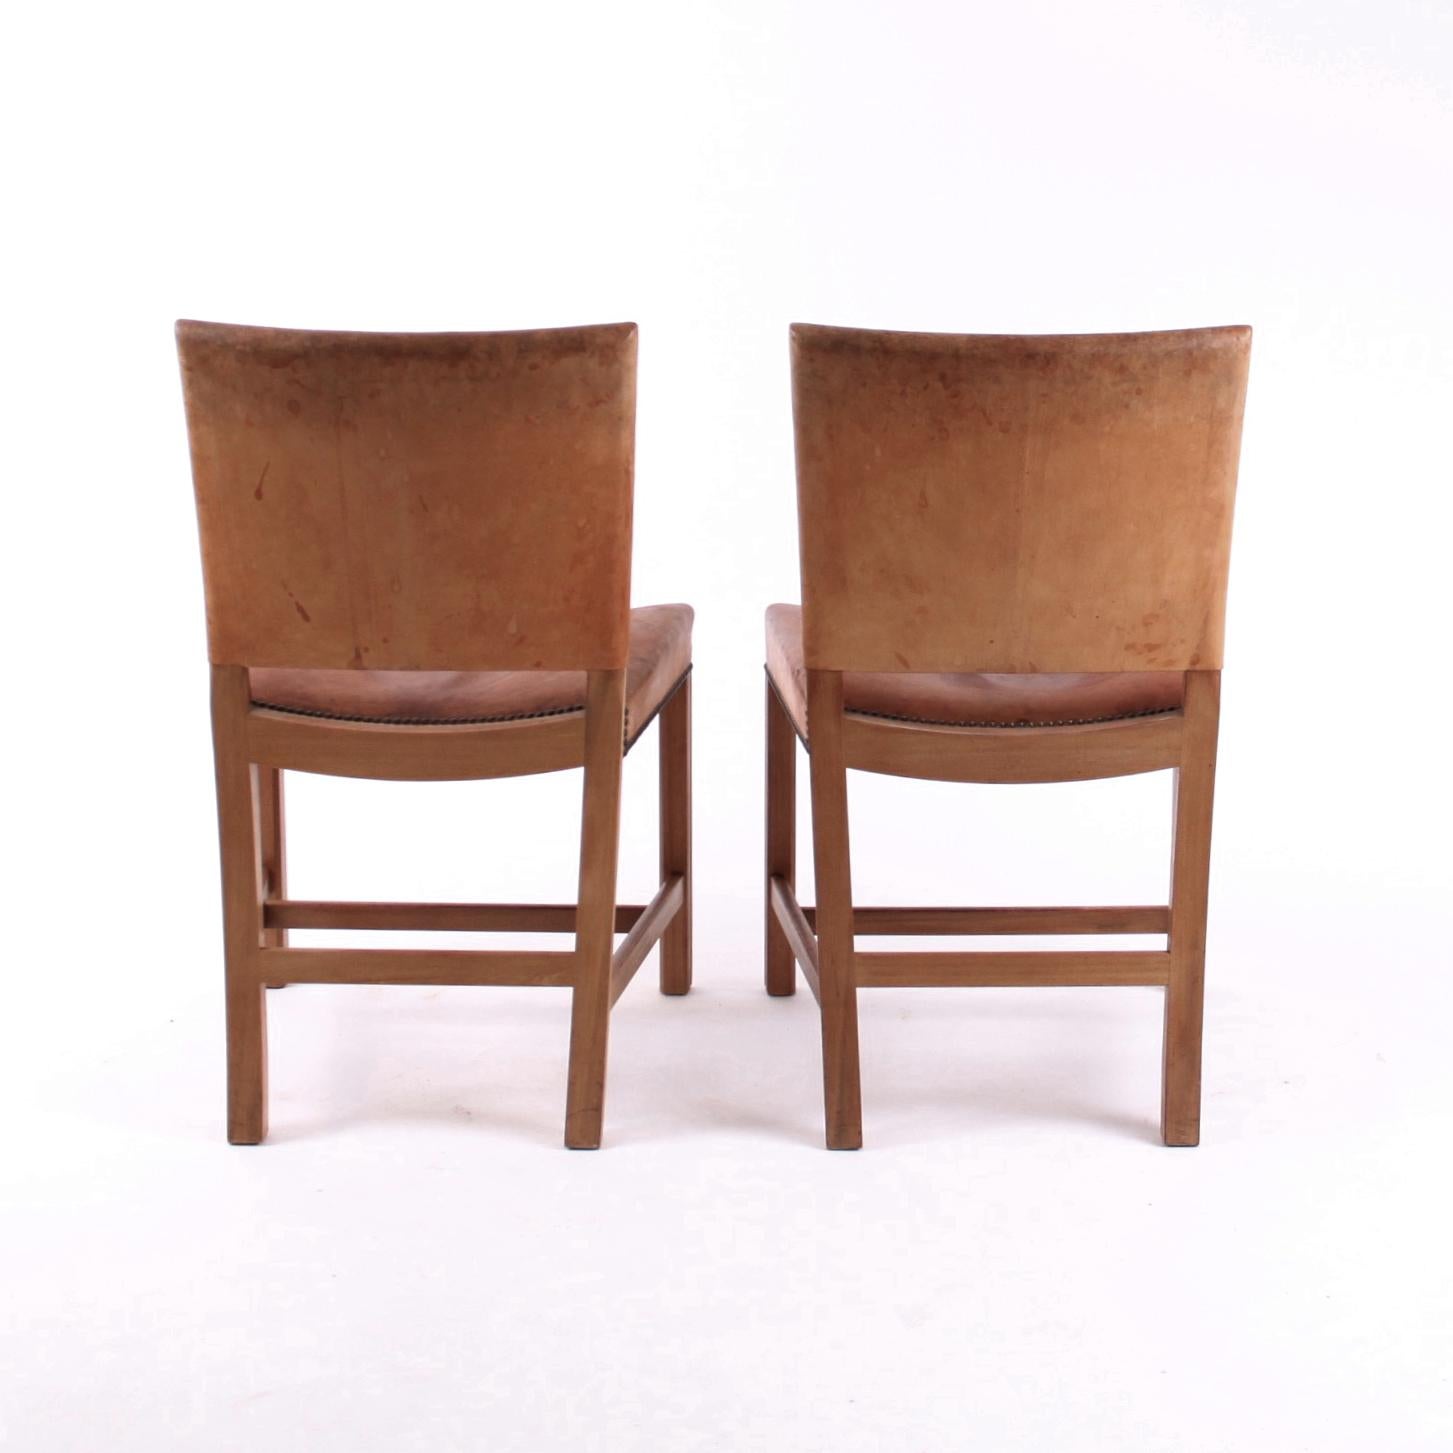 20th Century Six Kaare Klint Red Chairs, Mahogany and Original Niger Leather